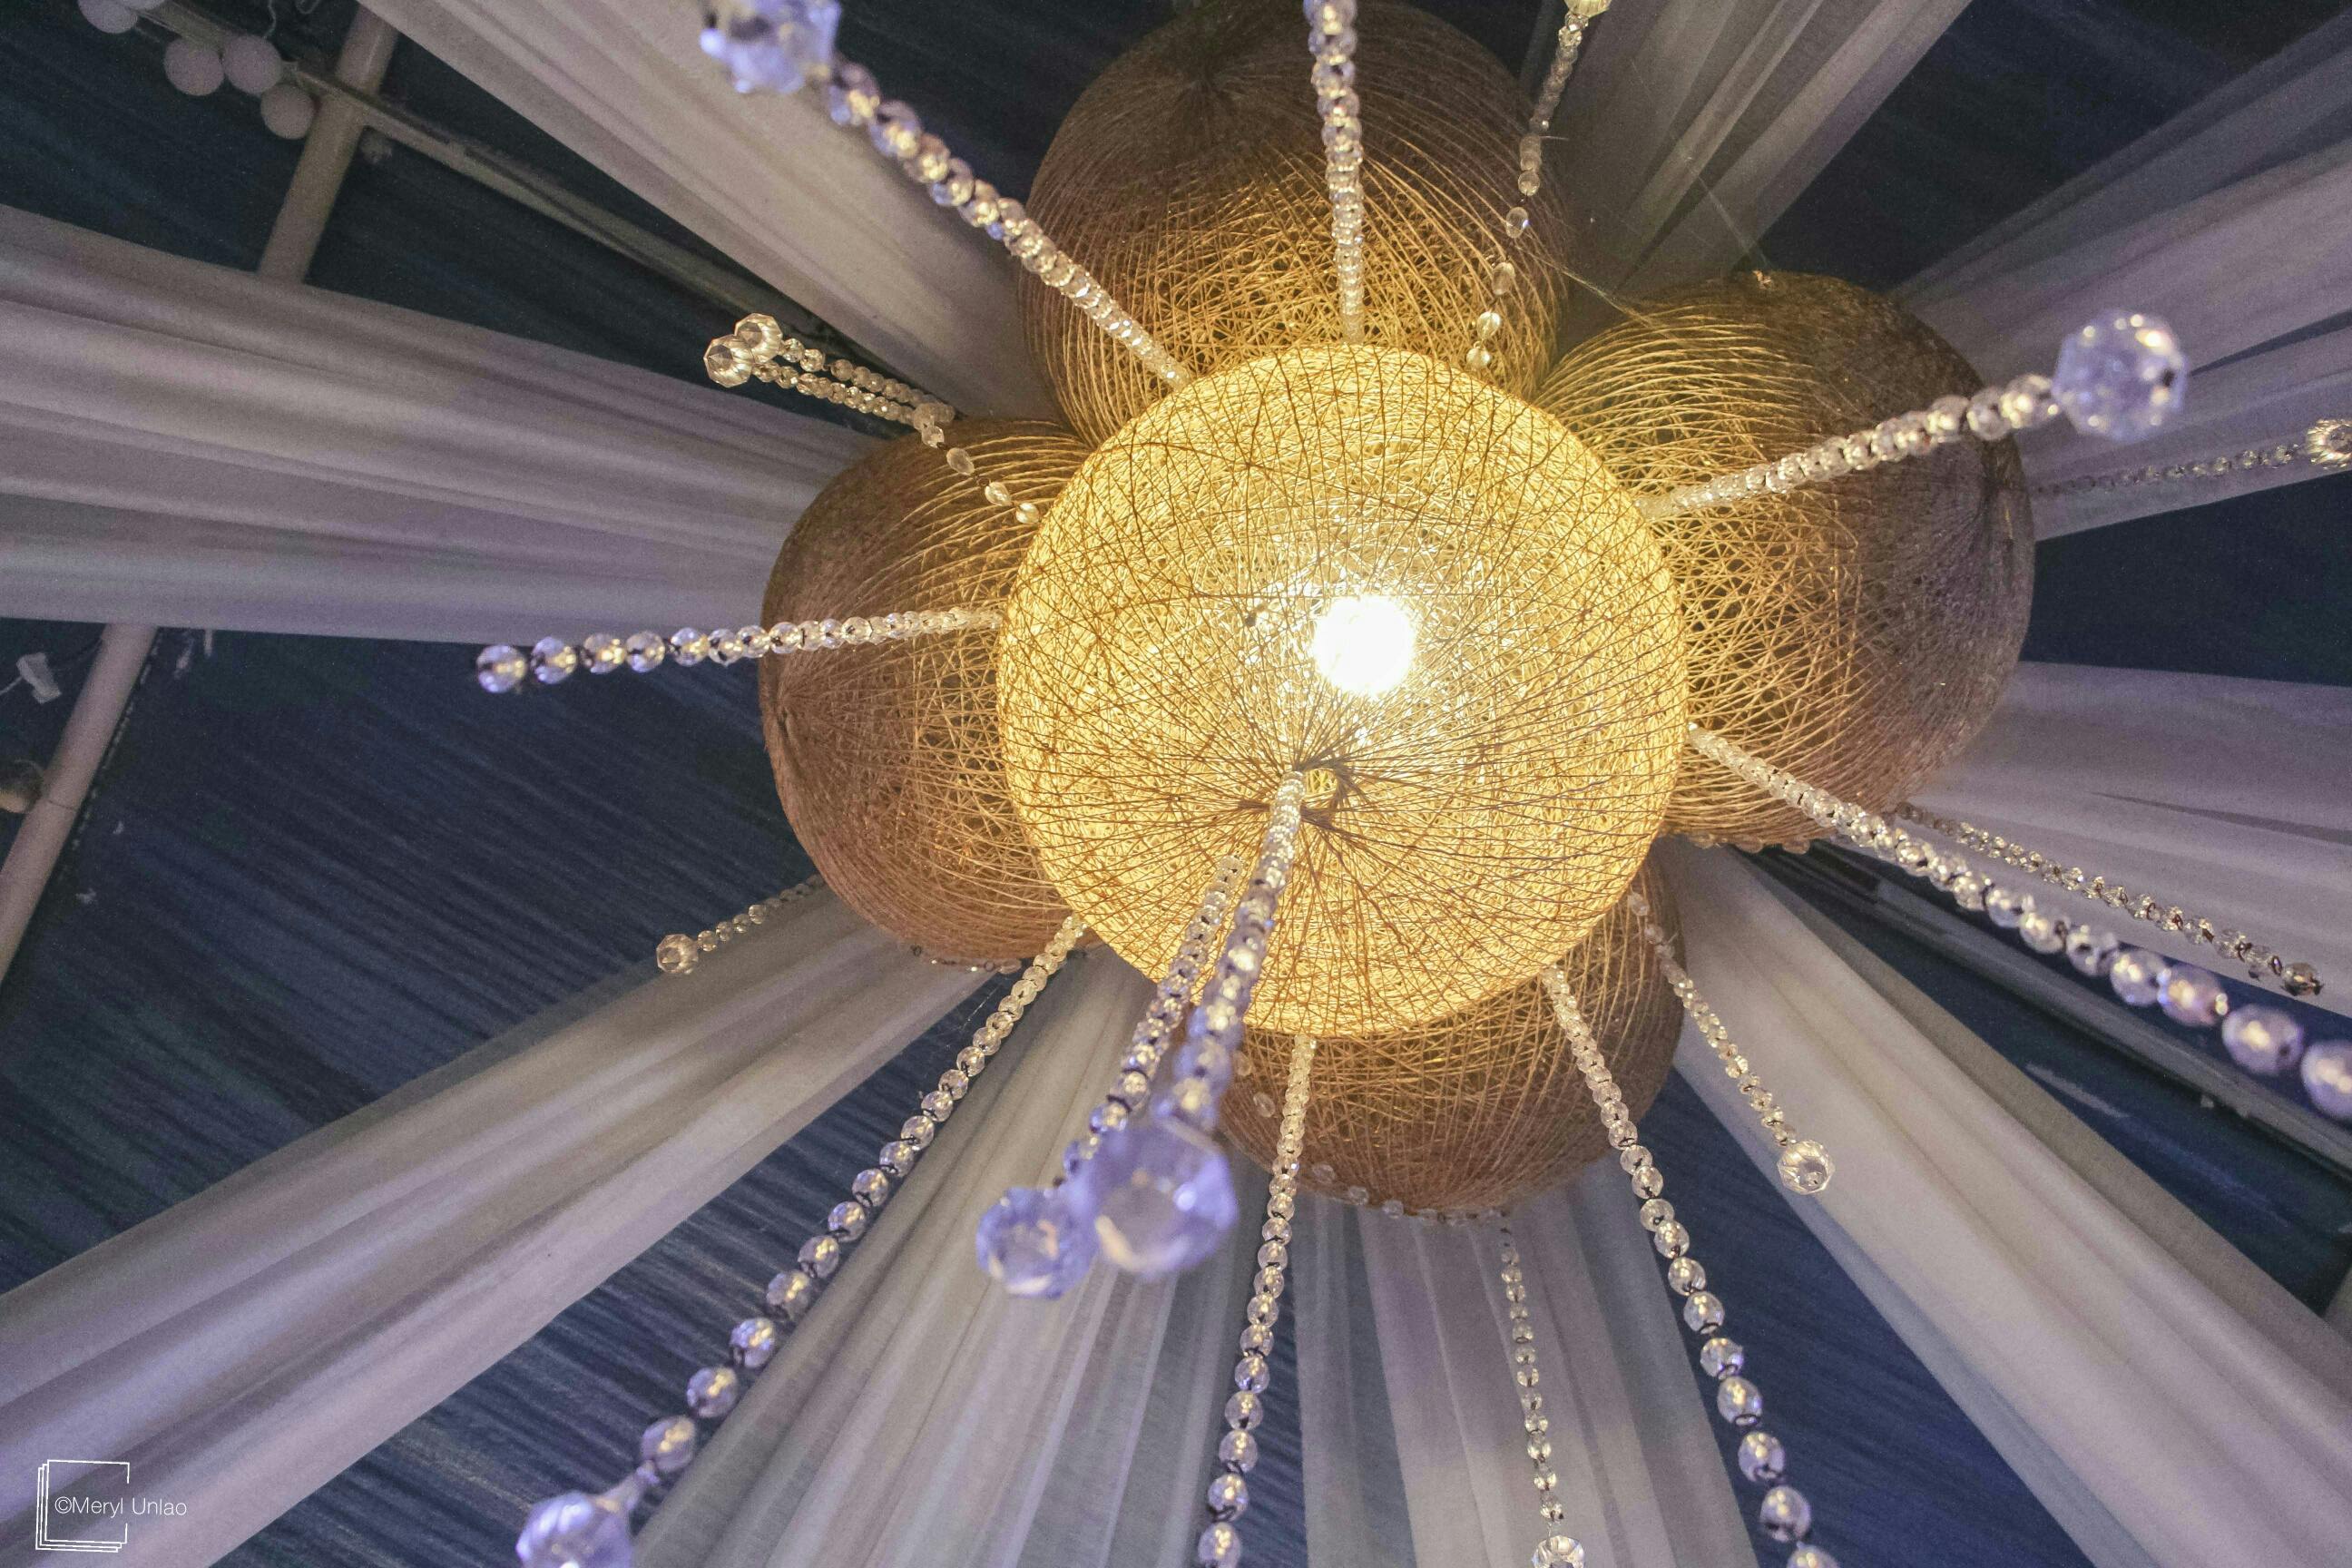 Free stock photo of ceiling lights, chandelier, lights